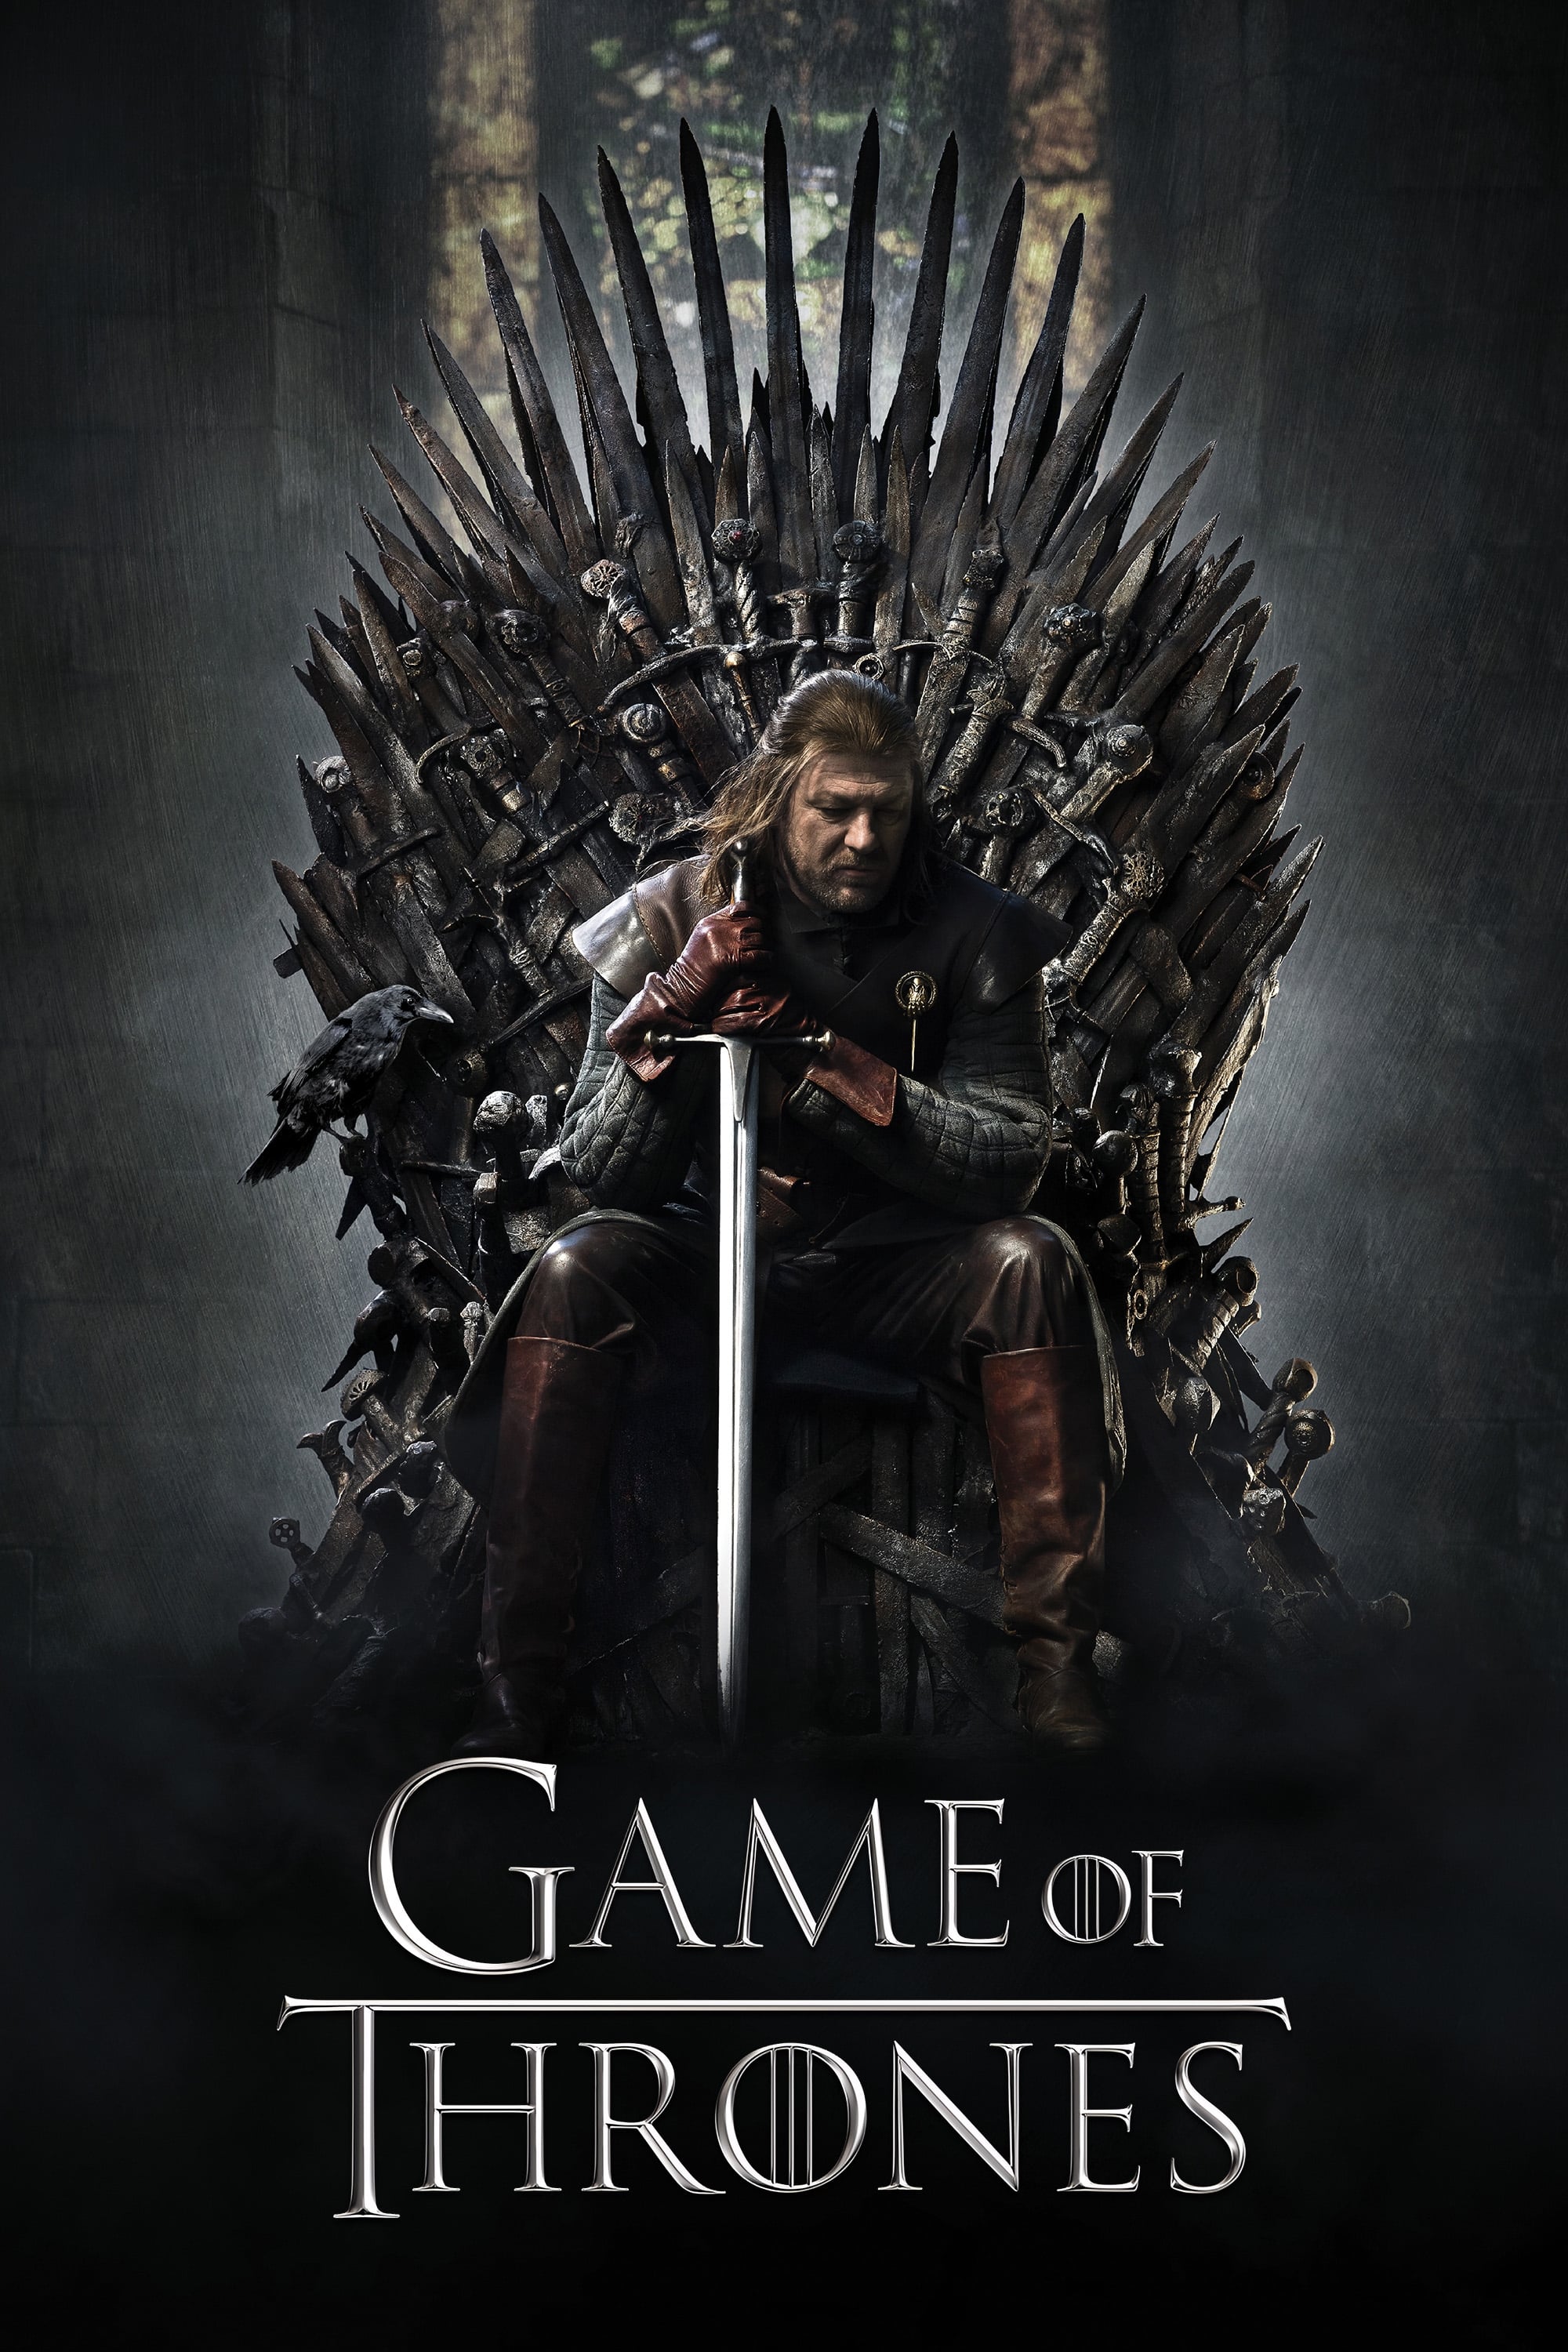 Game of Thrones Background (Poster)